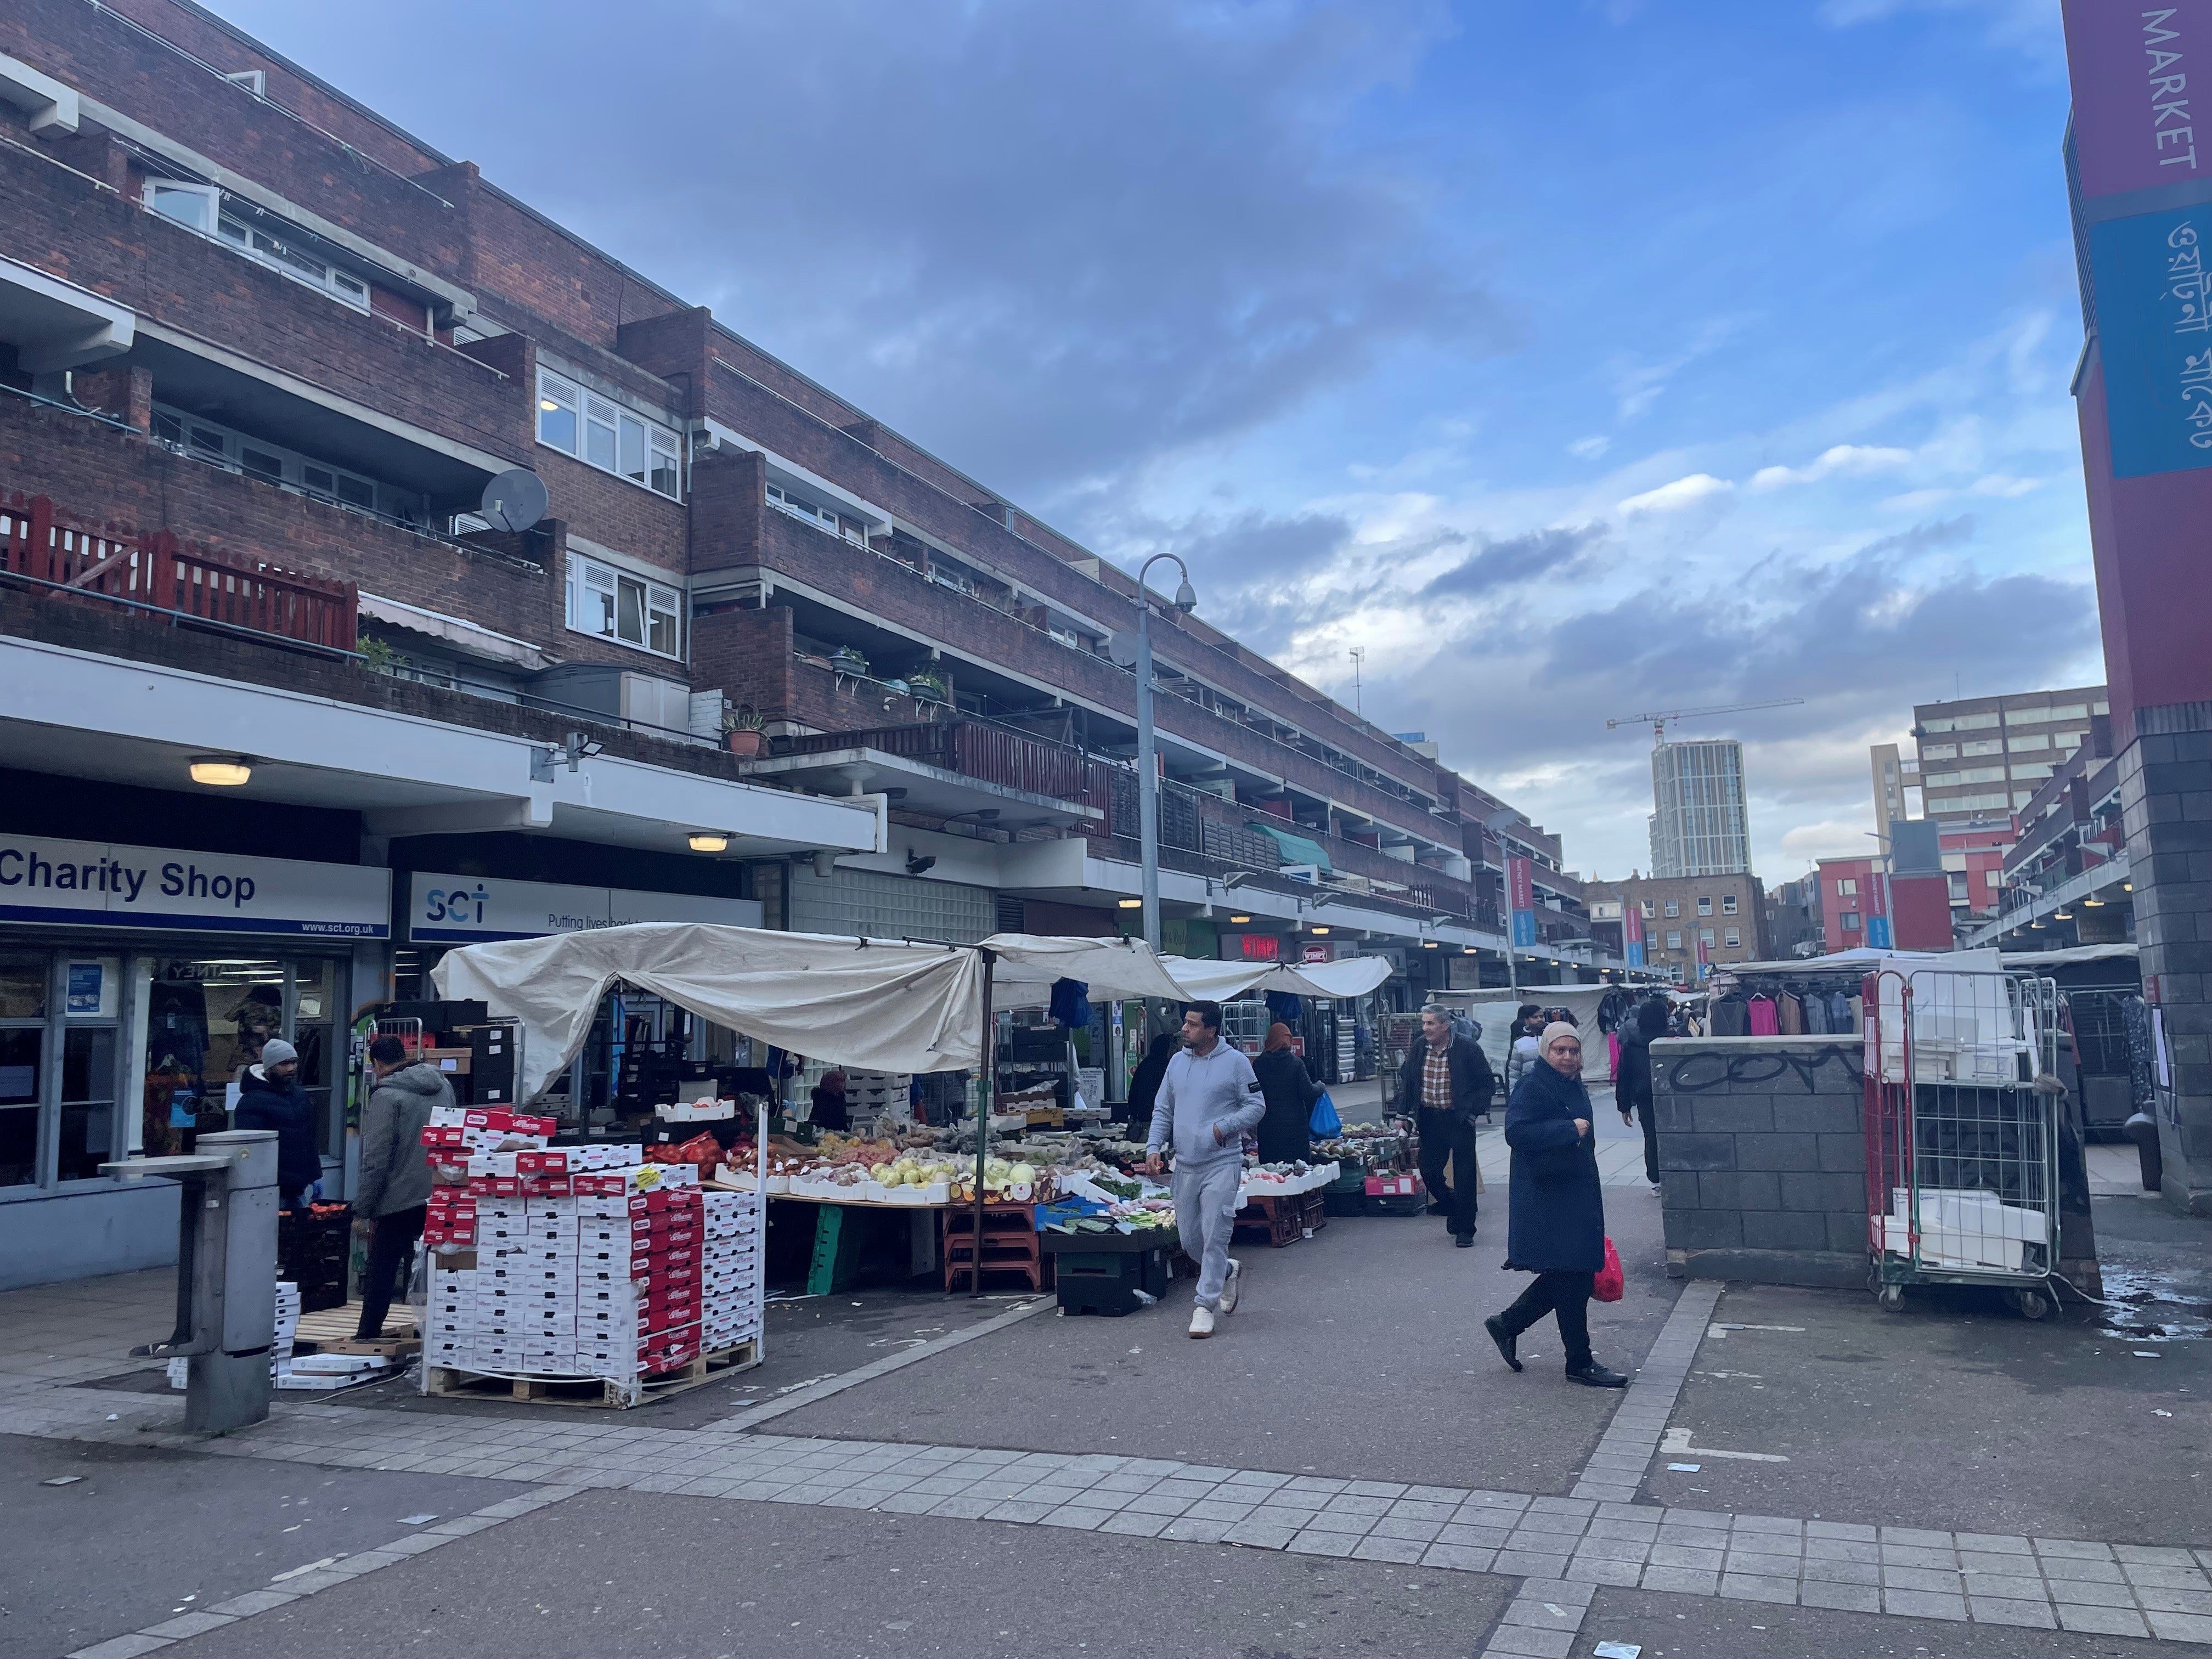 Watney Market in Shadwell, which had the third lowest median household income in Tower Hamlets in 2019, according to the Council